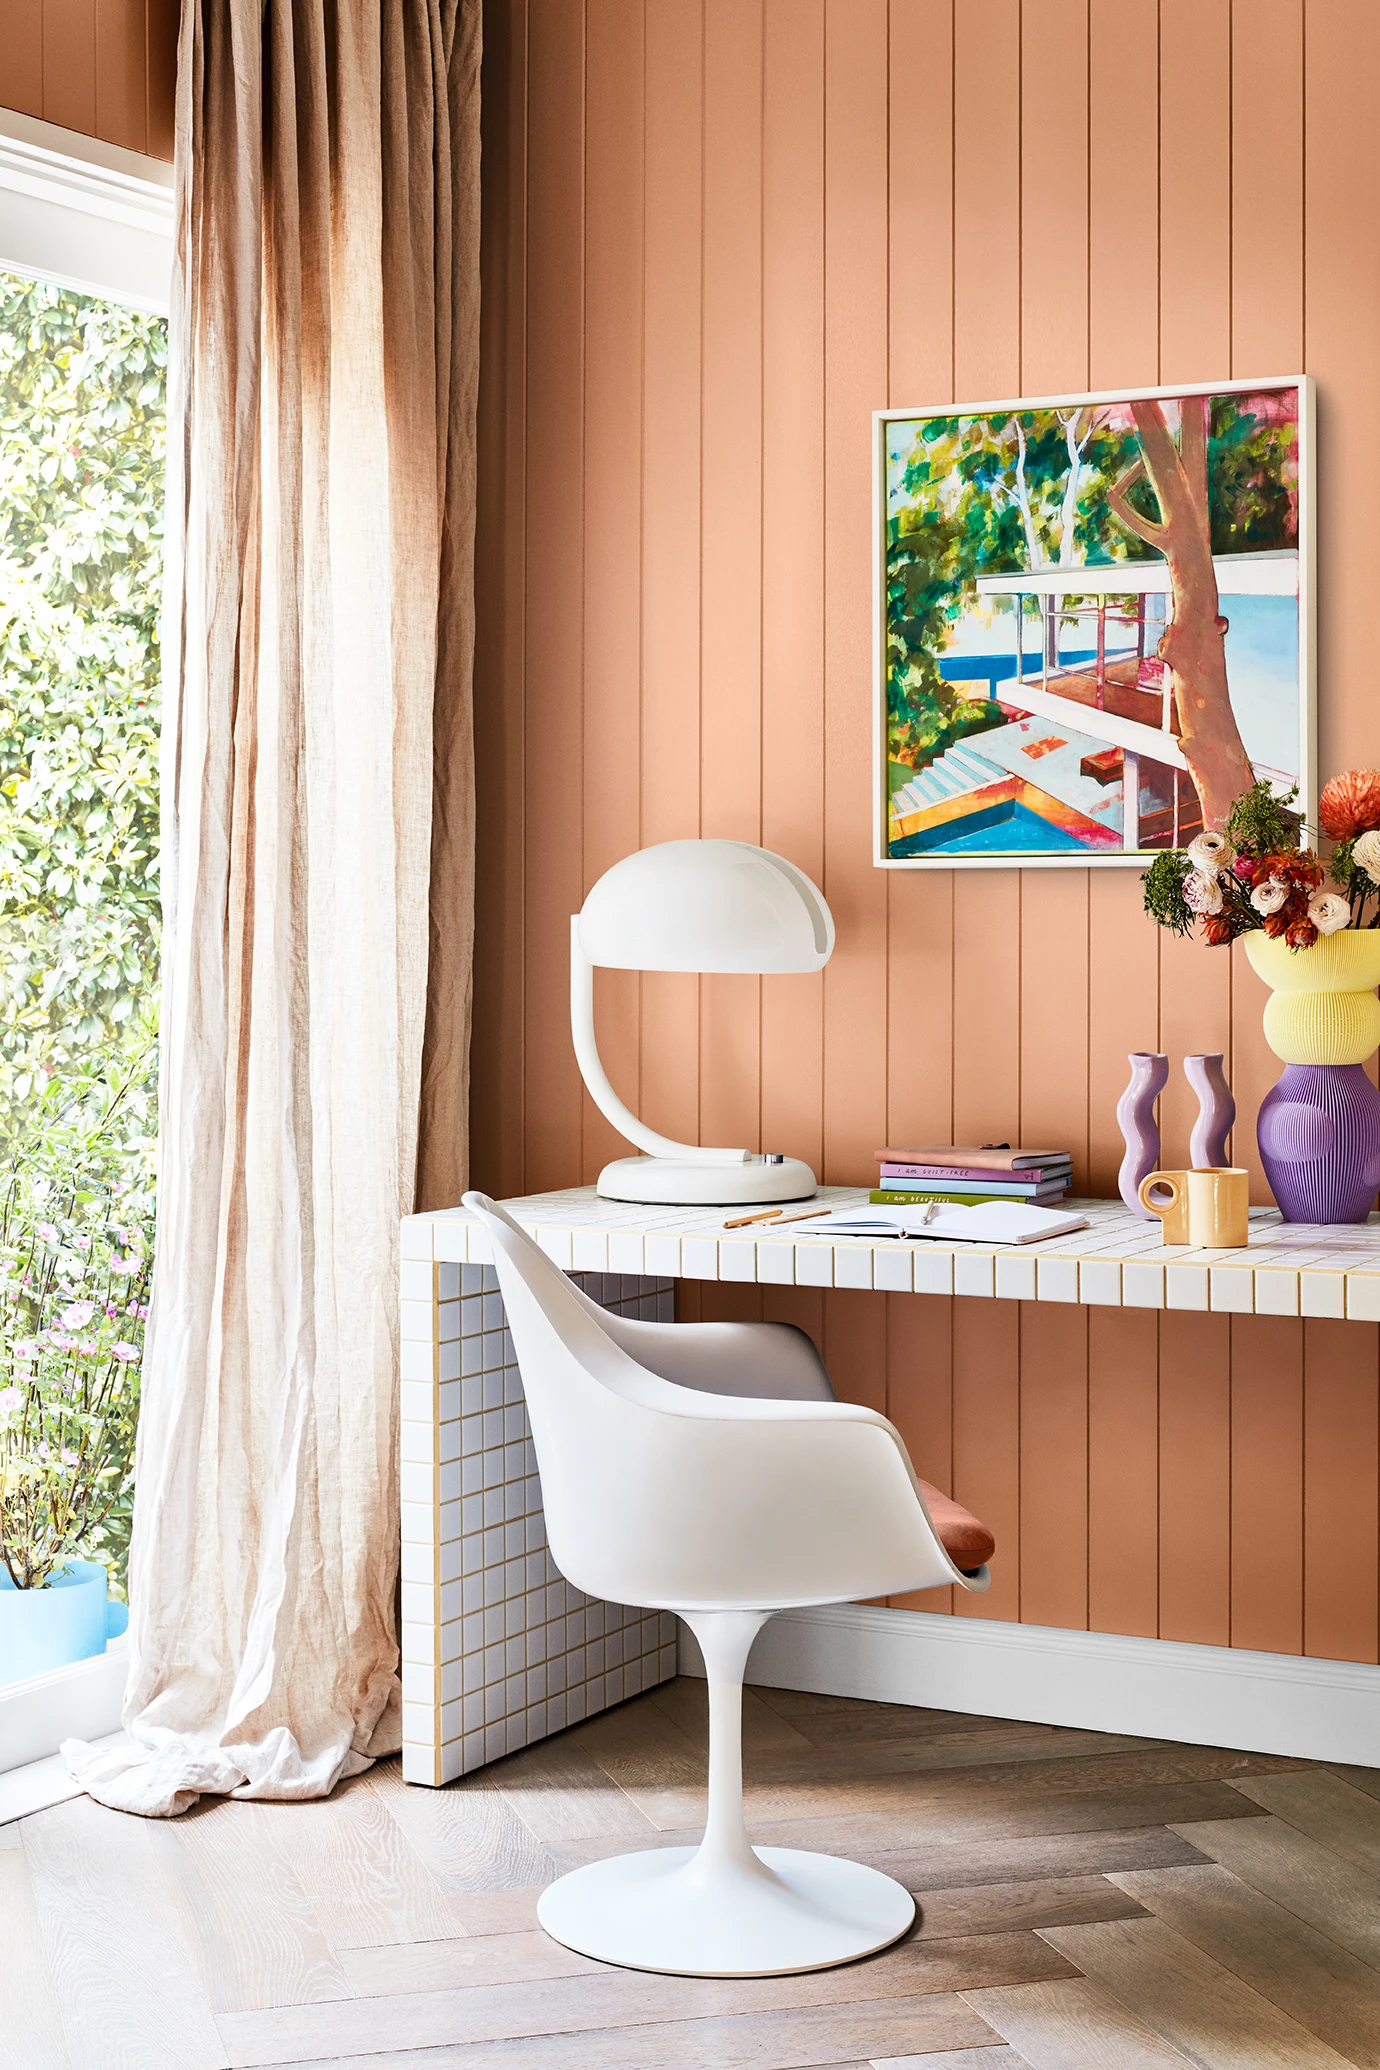 Study nook with tiled desk and neutral orange walls